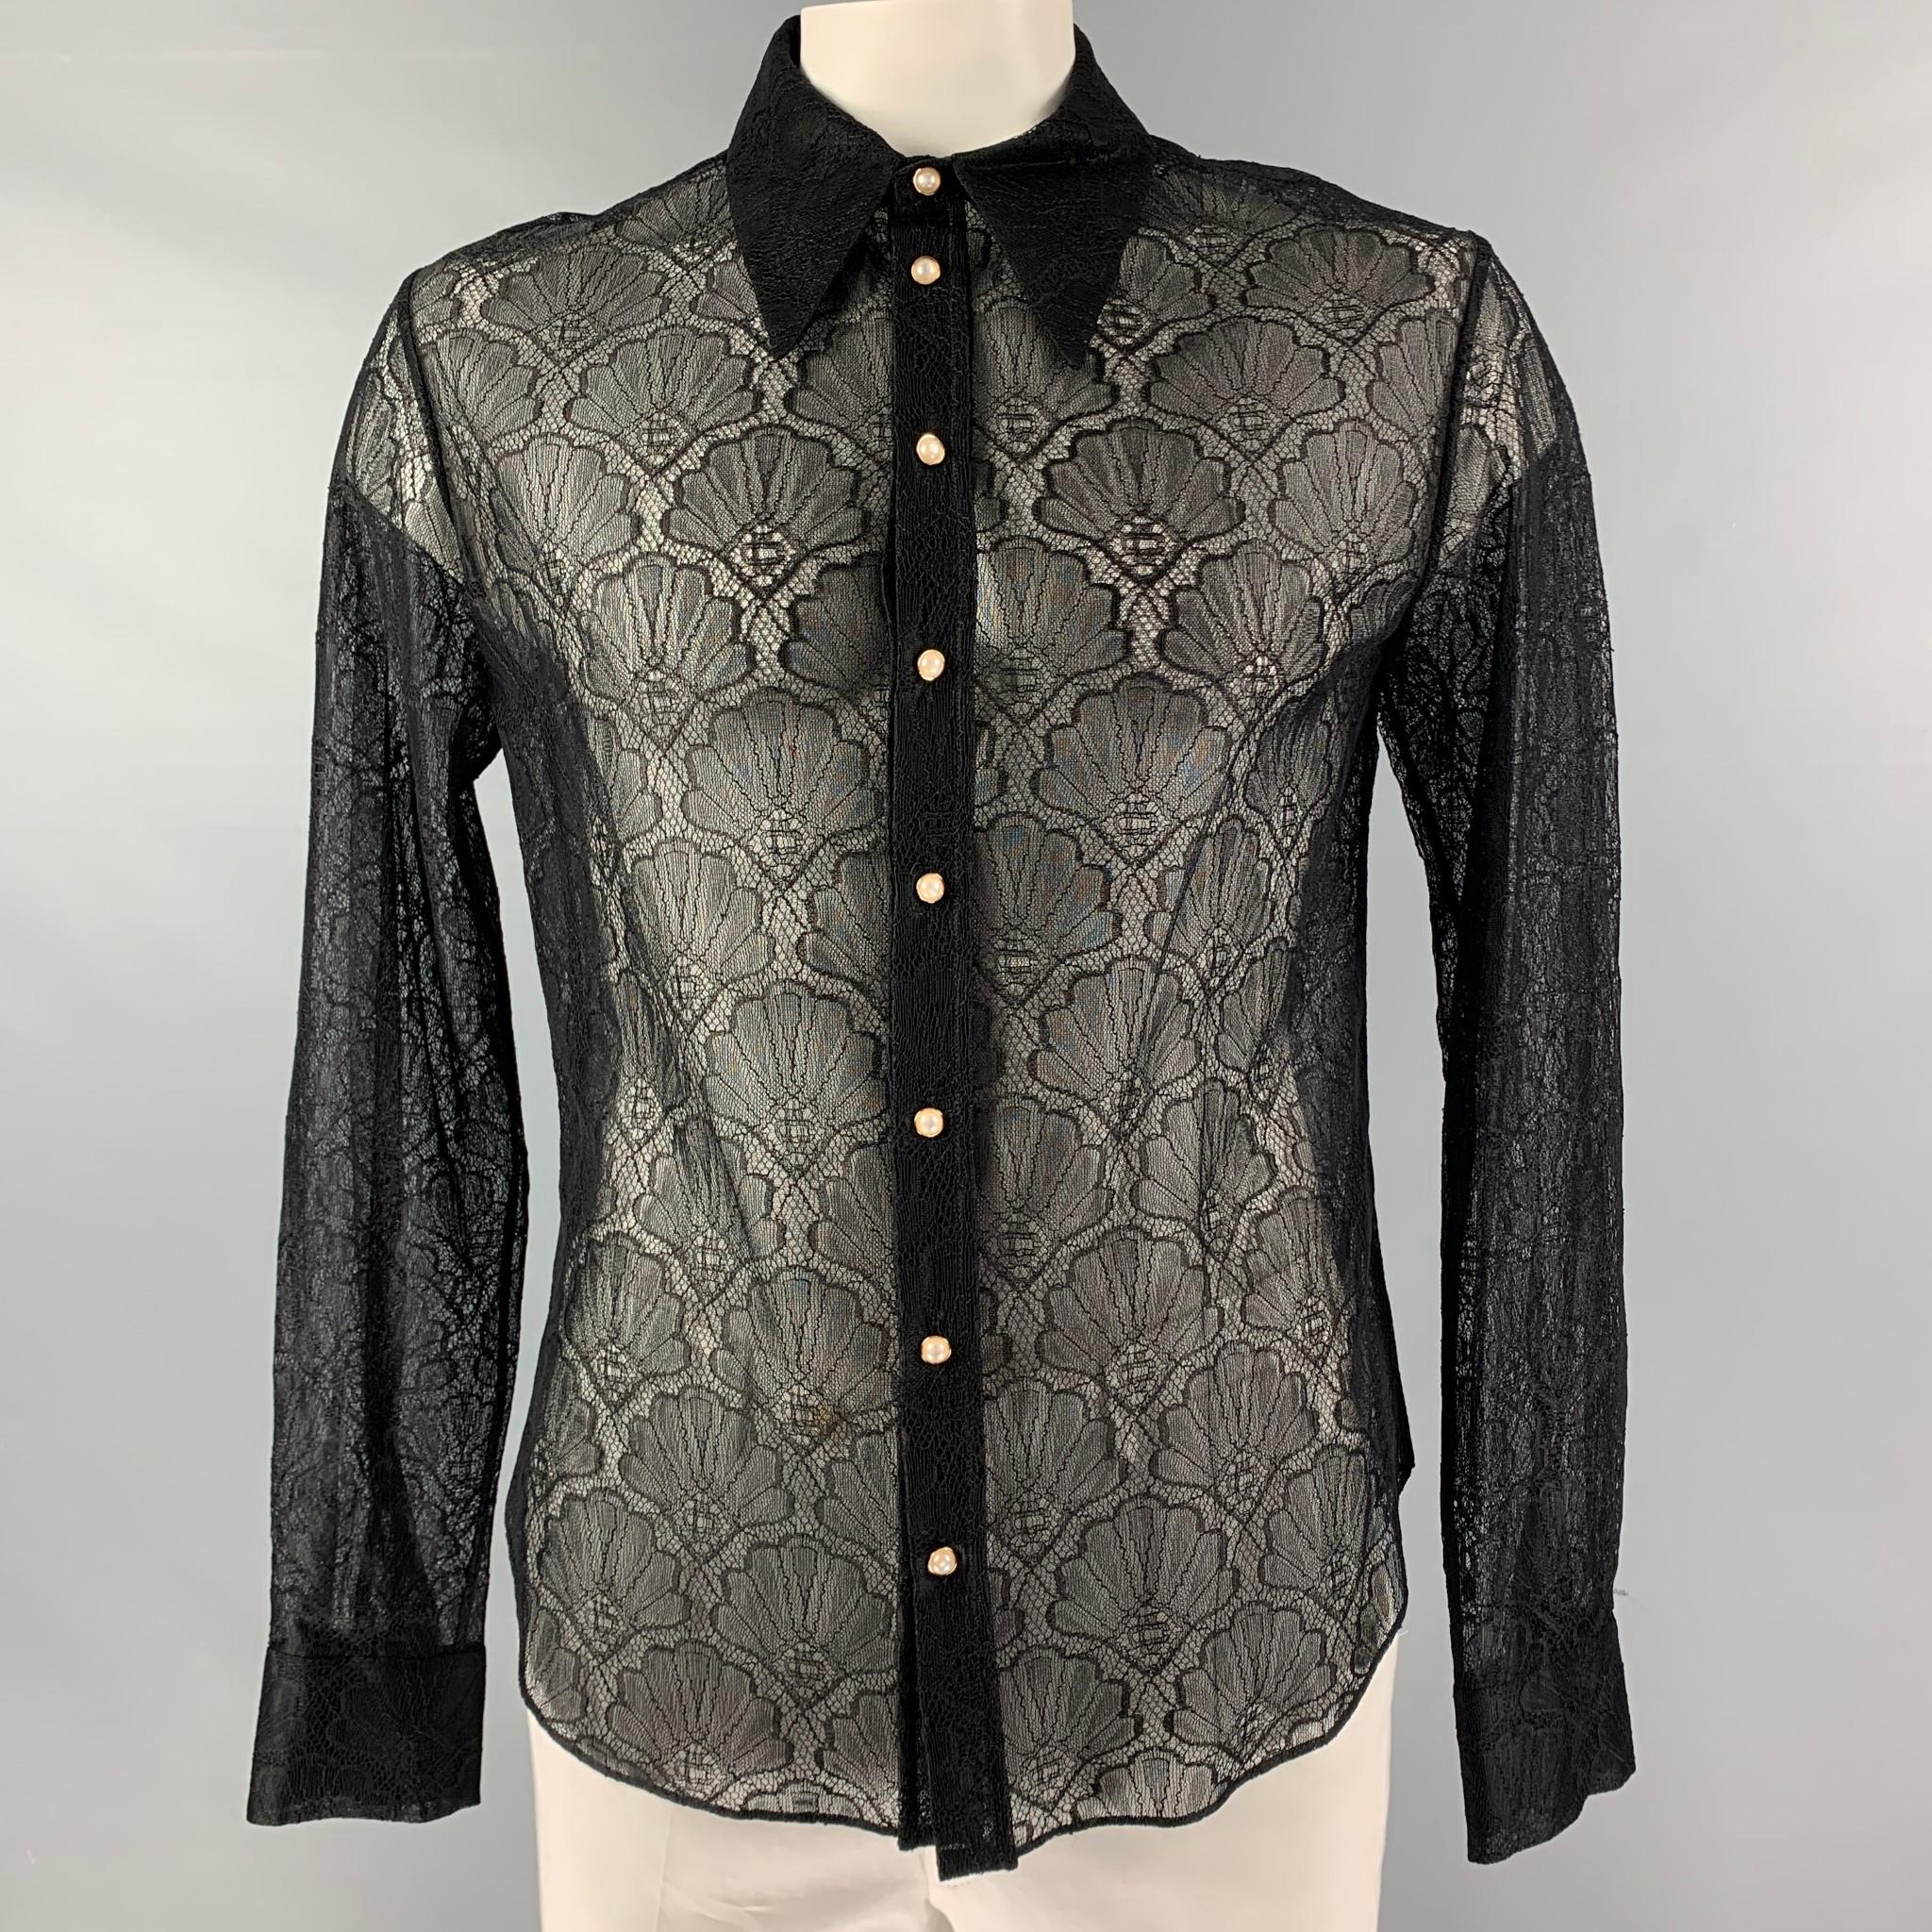 CASABLANCA long sleeves shirt comes in black lace polyamide blend material featuring a cutaway collar, faux pearl buttons, and button down closure. Made in Italy.

New with Tags 
Marked: XL

Measurements:

Shoulder: 20 in.
Bust: 45 in.
Sleeve: 27.5